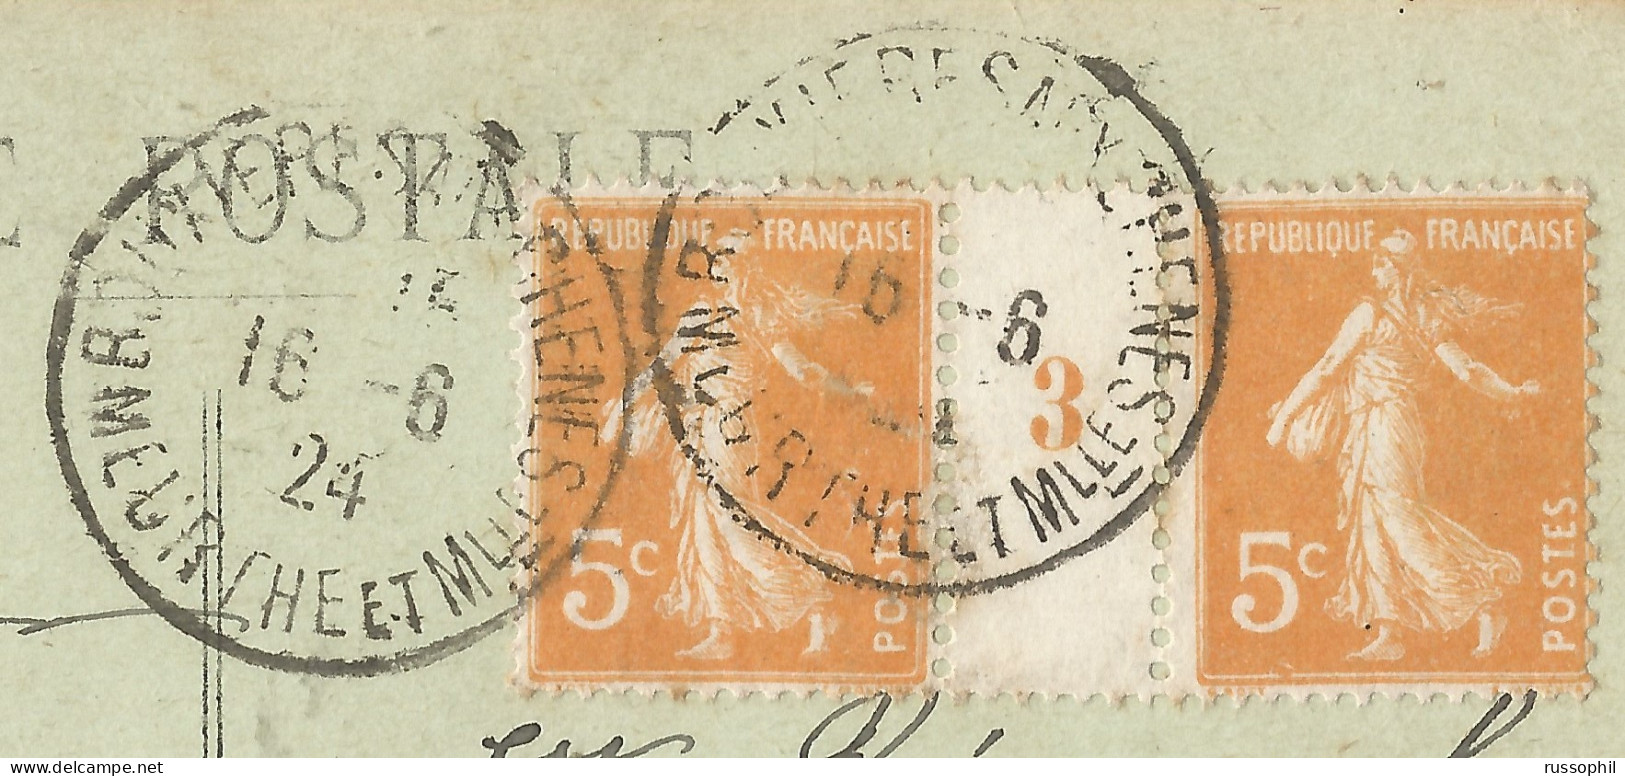 FRANCE -  MILLESIMES - PAIR Yv.  #158 MILLESIME 3 ALONE FRANKING PC FROM BOUXIERES AUX CHENES TO BAGNEUX - 1924 - Millésimes